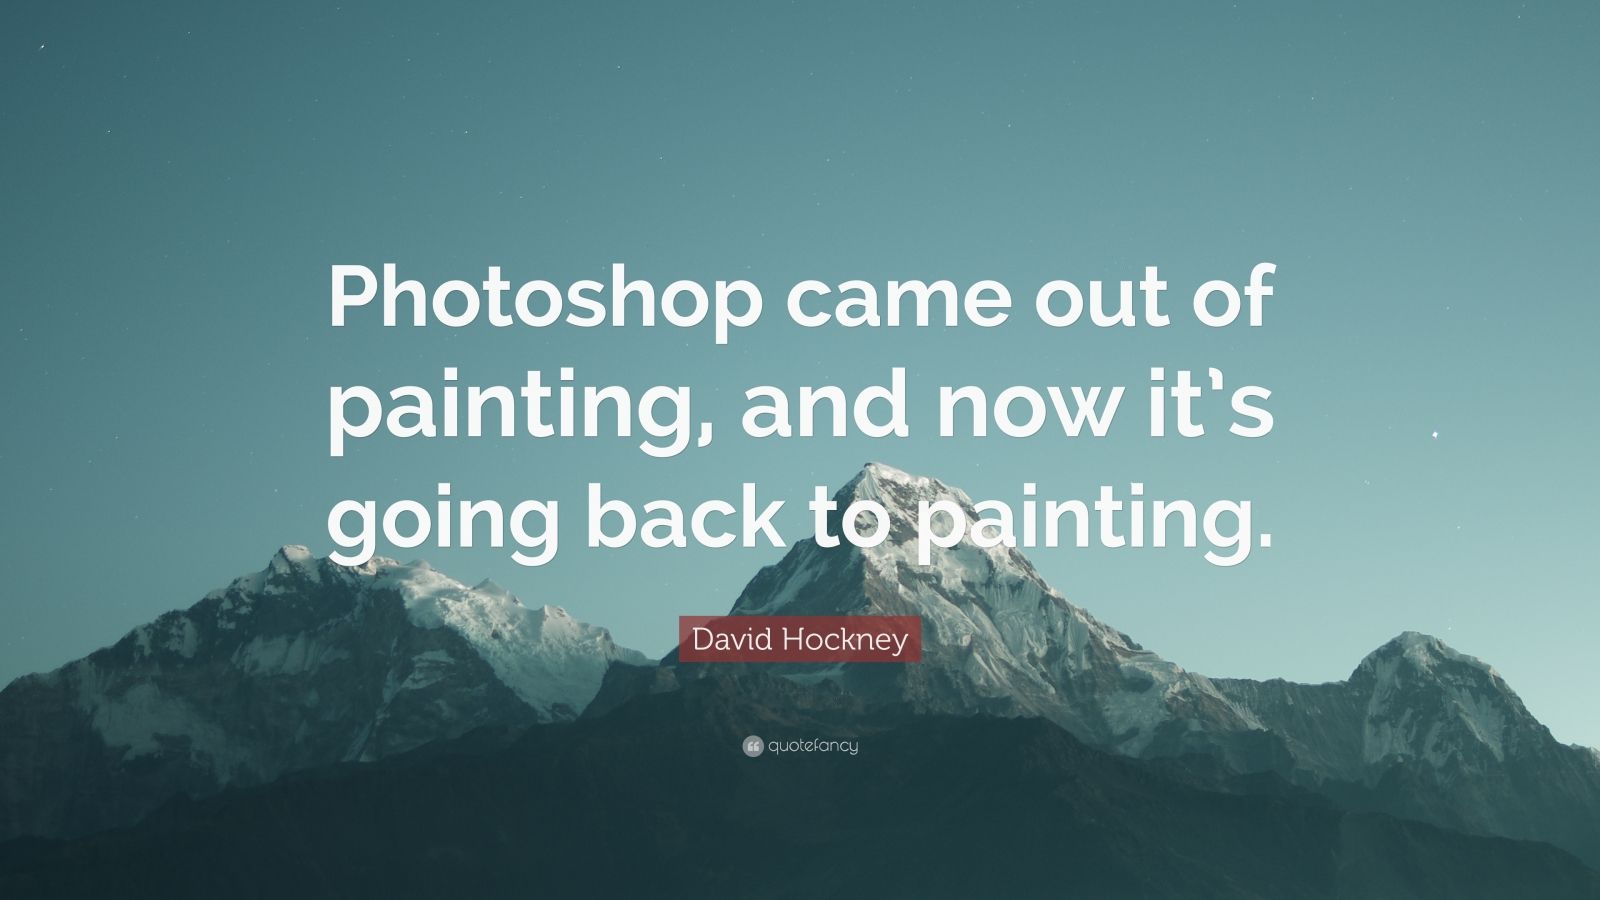 Top 180 David Hockney Quotes | 2021 Edition | Free Images - QuoteFancy